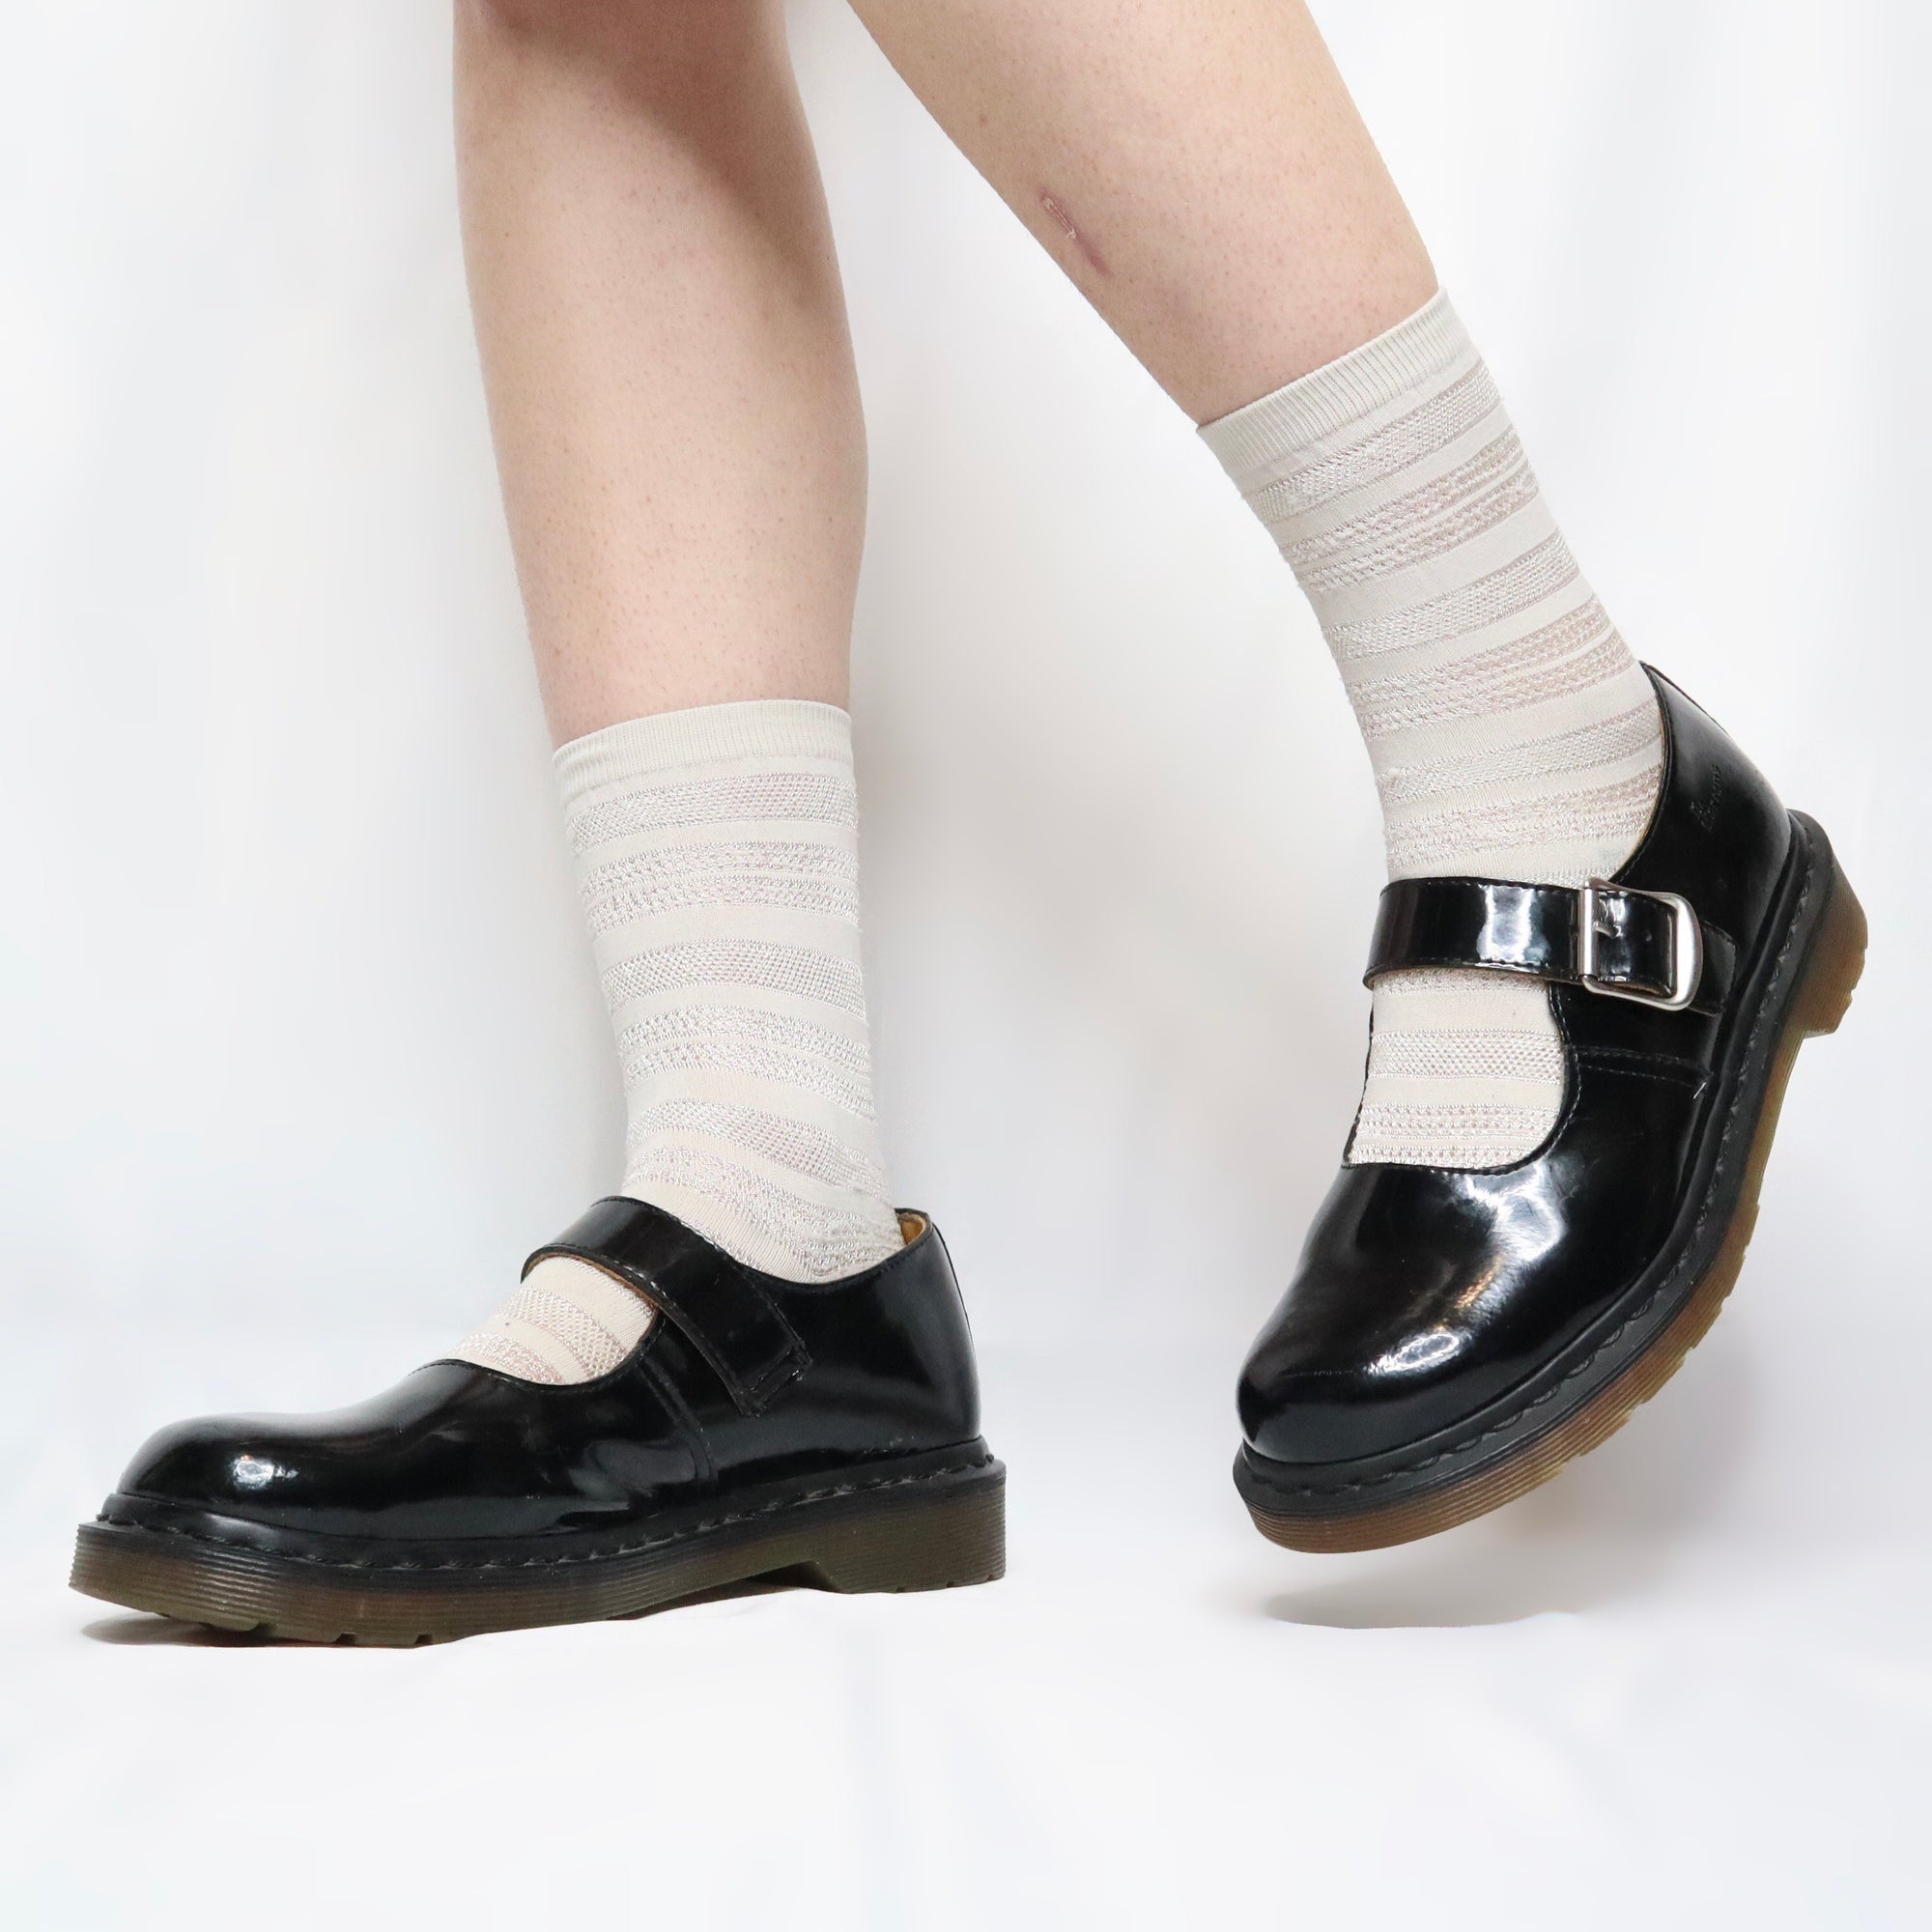 Dr Martens Black Mary Janes 